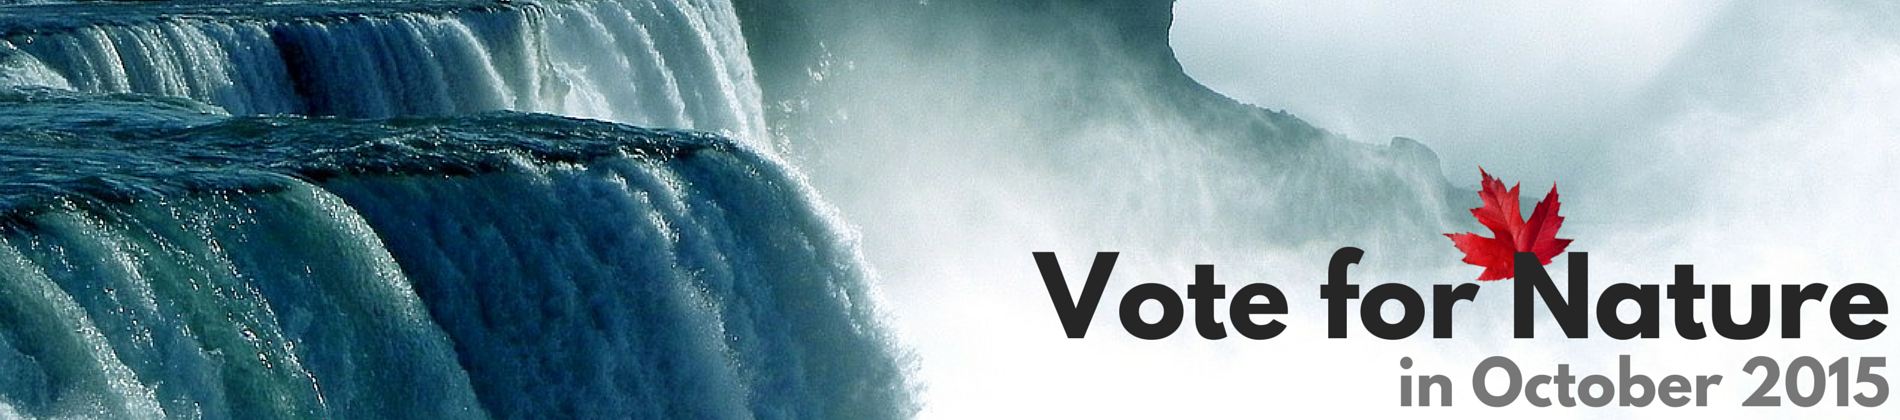 Waterfall Vote for Nature Banner